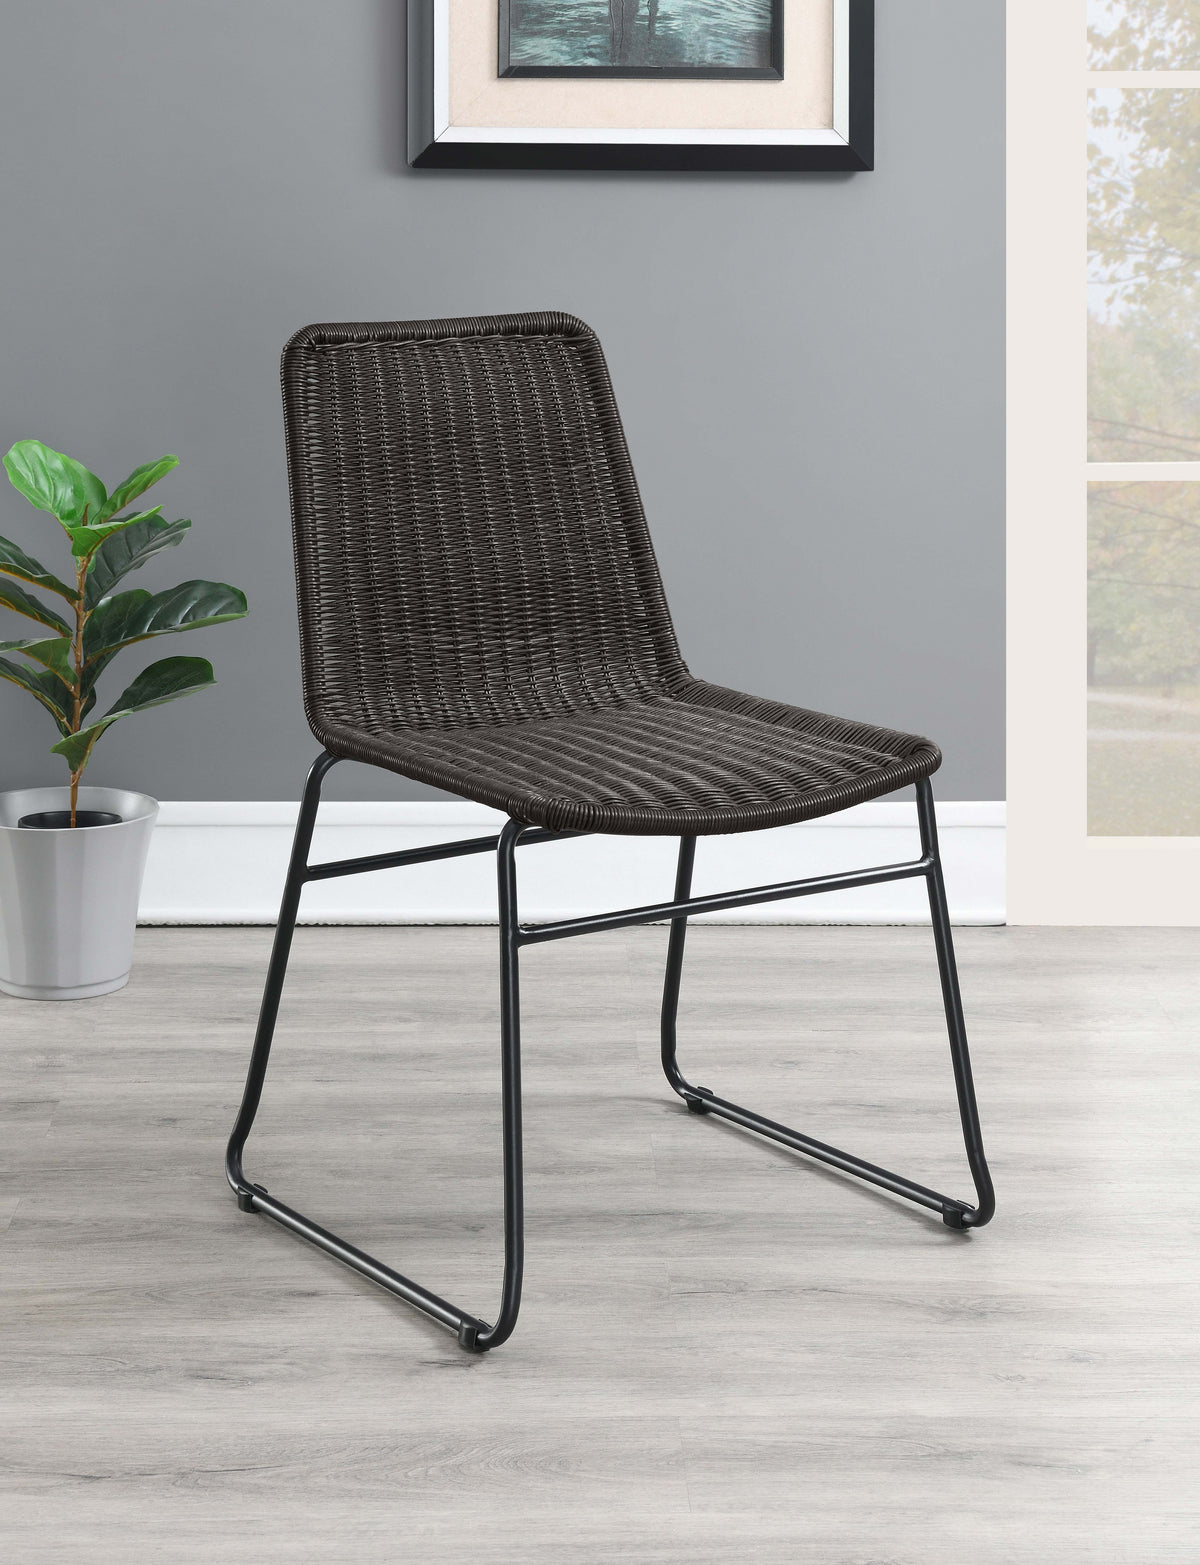 Dacy Upholstered Dining Chairs (Set of 2) Brown and Sandy Black Dacy Upholstered Dining Chairs (Set of 2) Brown and Sandy Black Half Price Furniture